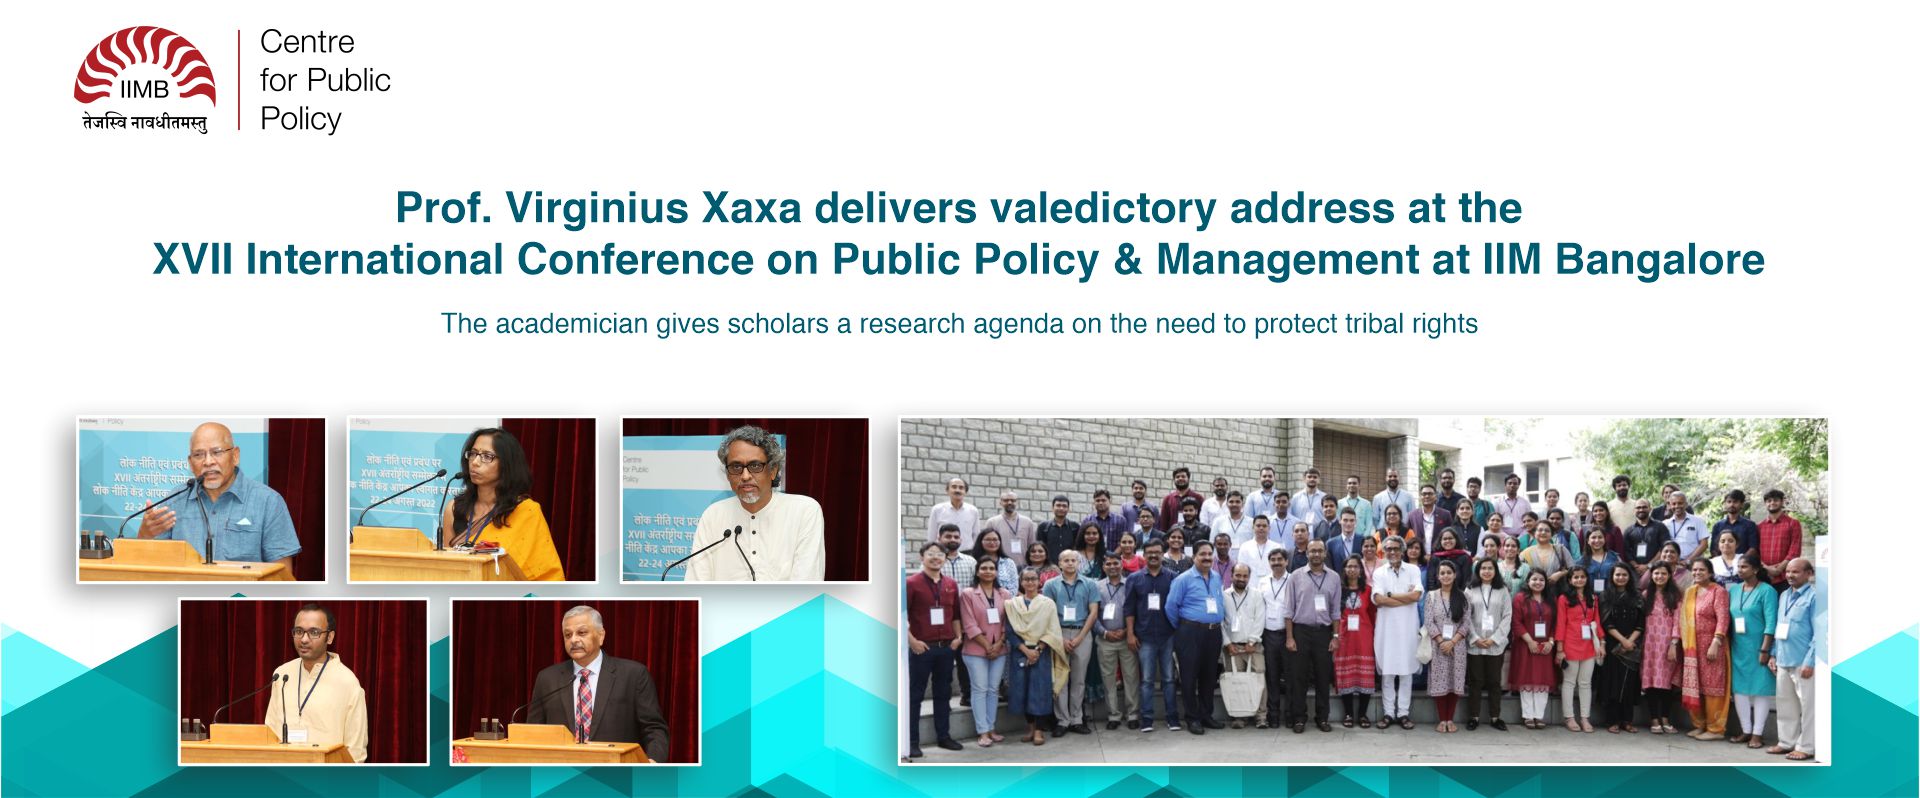 Prof. Virginius Xaxa delivers valedictory address at the XVII International Conference on Public Policy & Management at IIM Bangalore